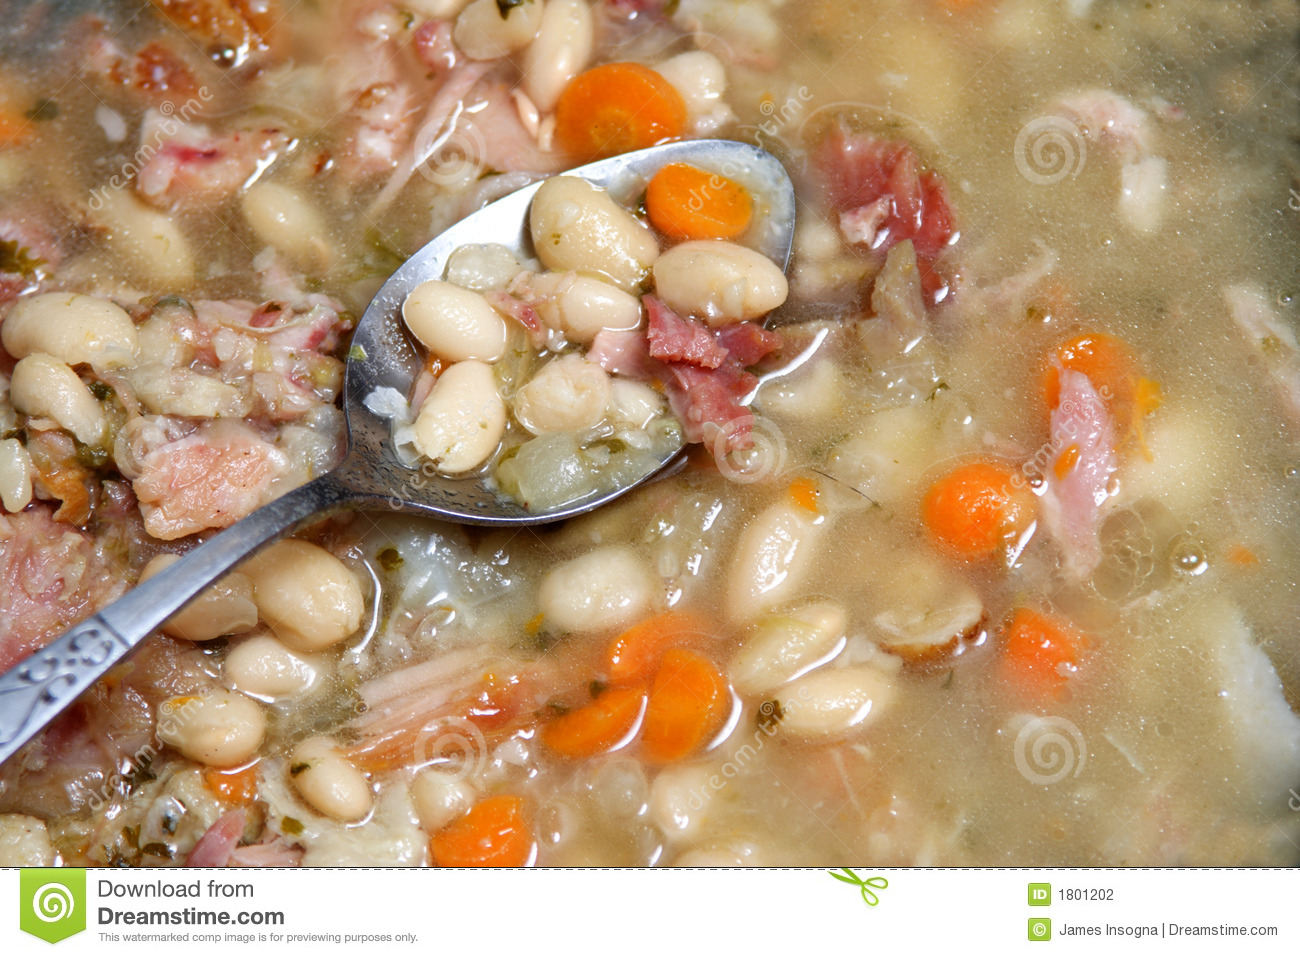 Spoon In Bean Soup  Stock Photography   Image  1801202